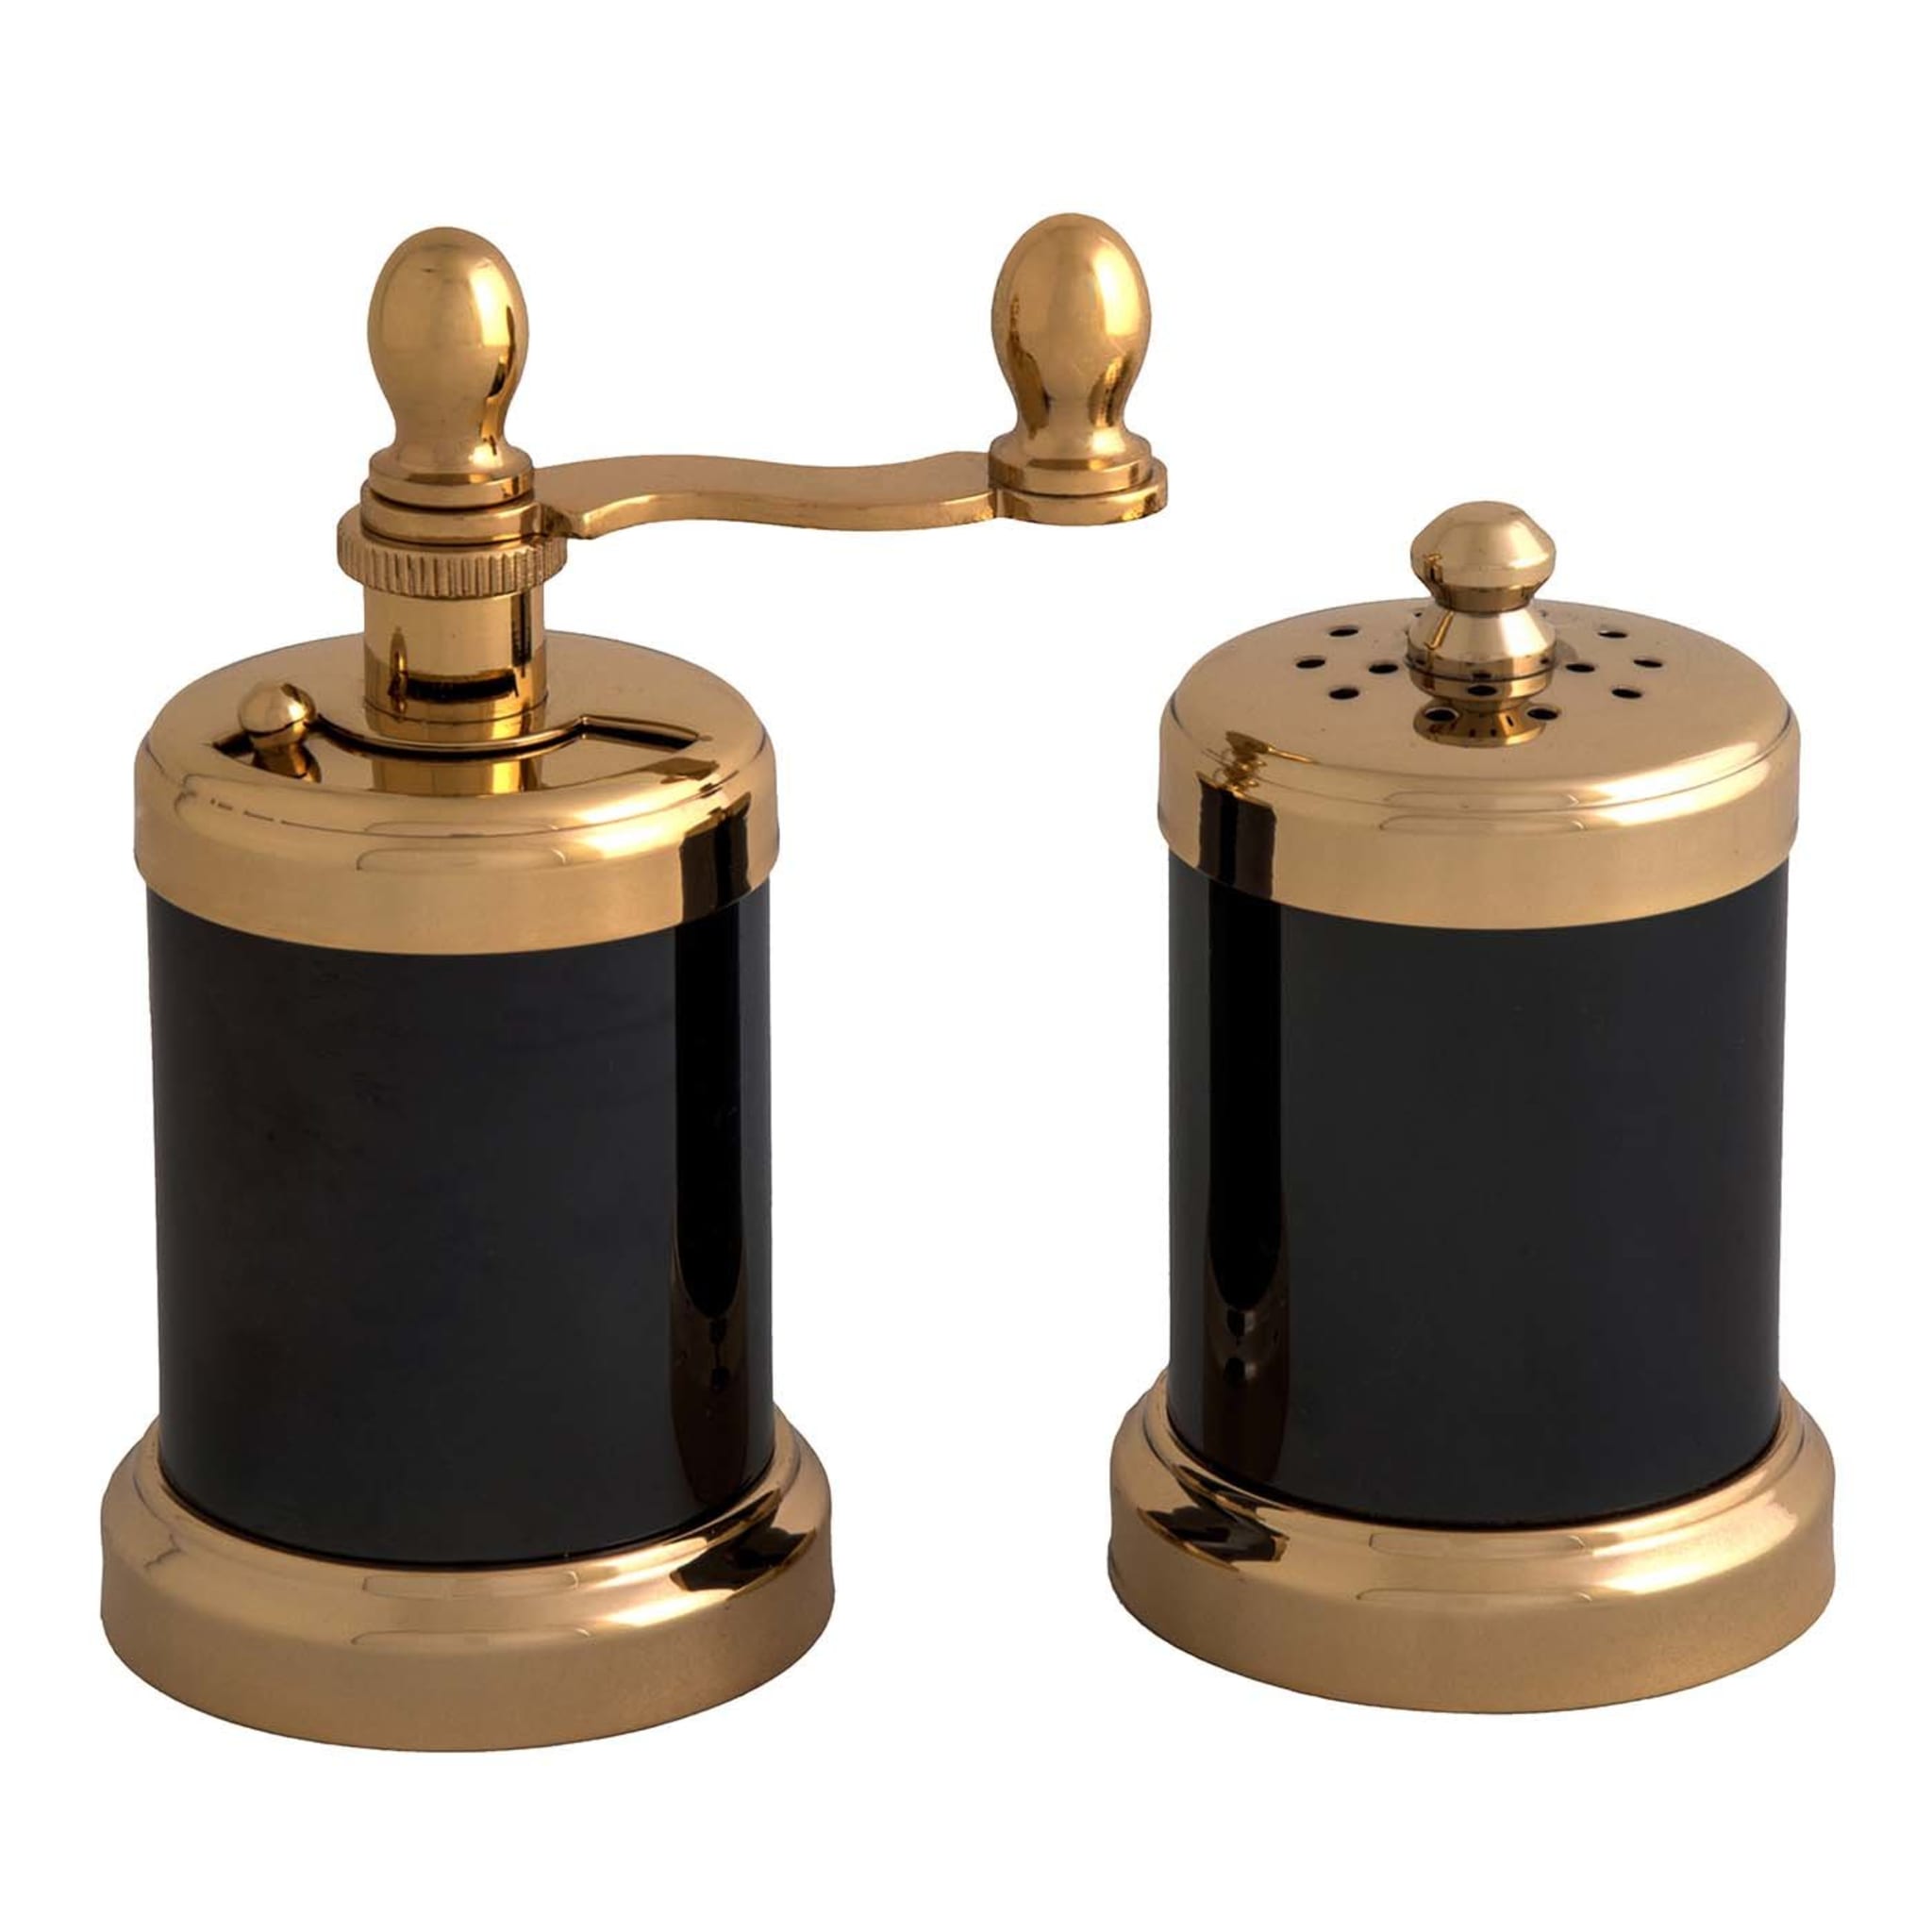 Gold and Black Nickel-Plated Brass Salt Shaker and Pepper Mill - Main view